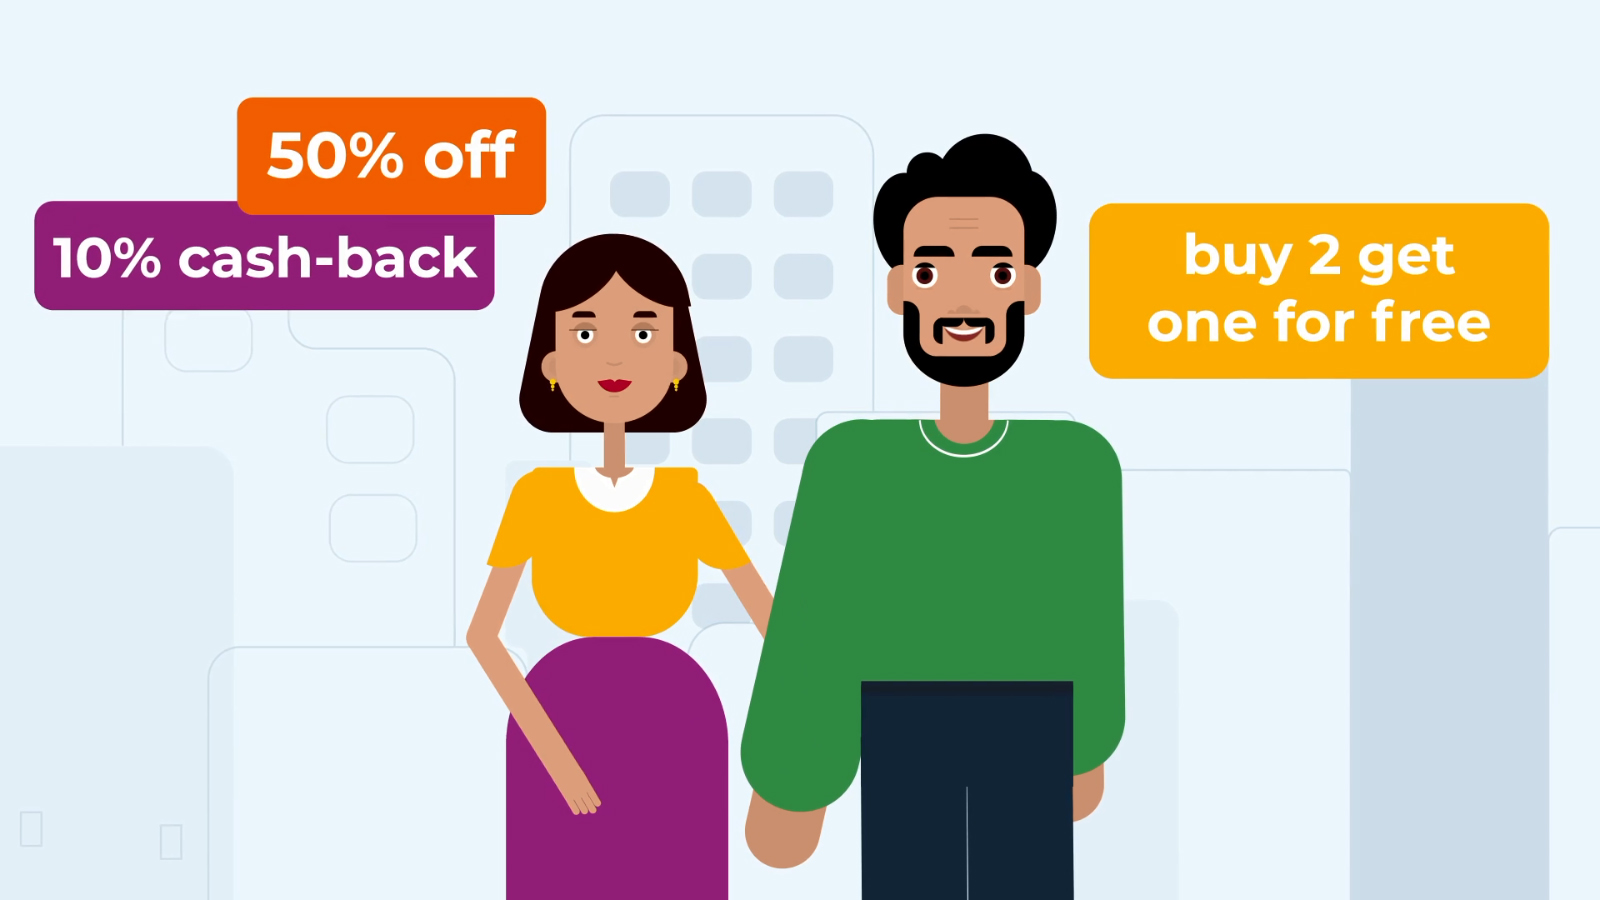 Explainer Video for B9 Startup Discounts for users cash back